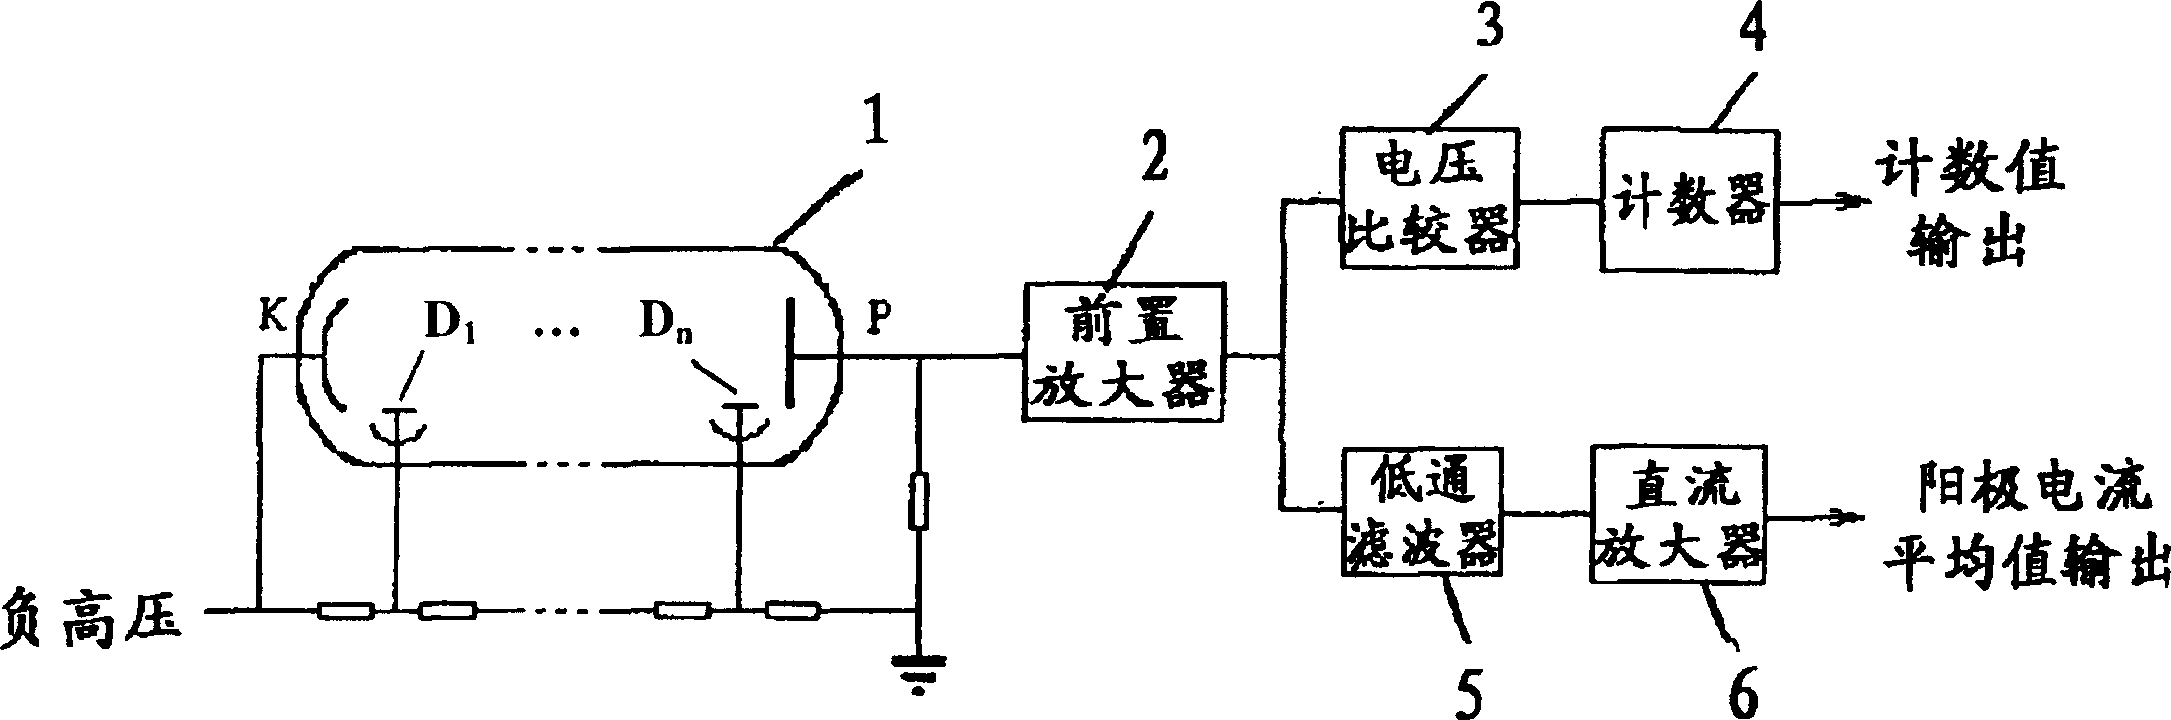 Photoelectric detection circuit for single photon counting instrument